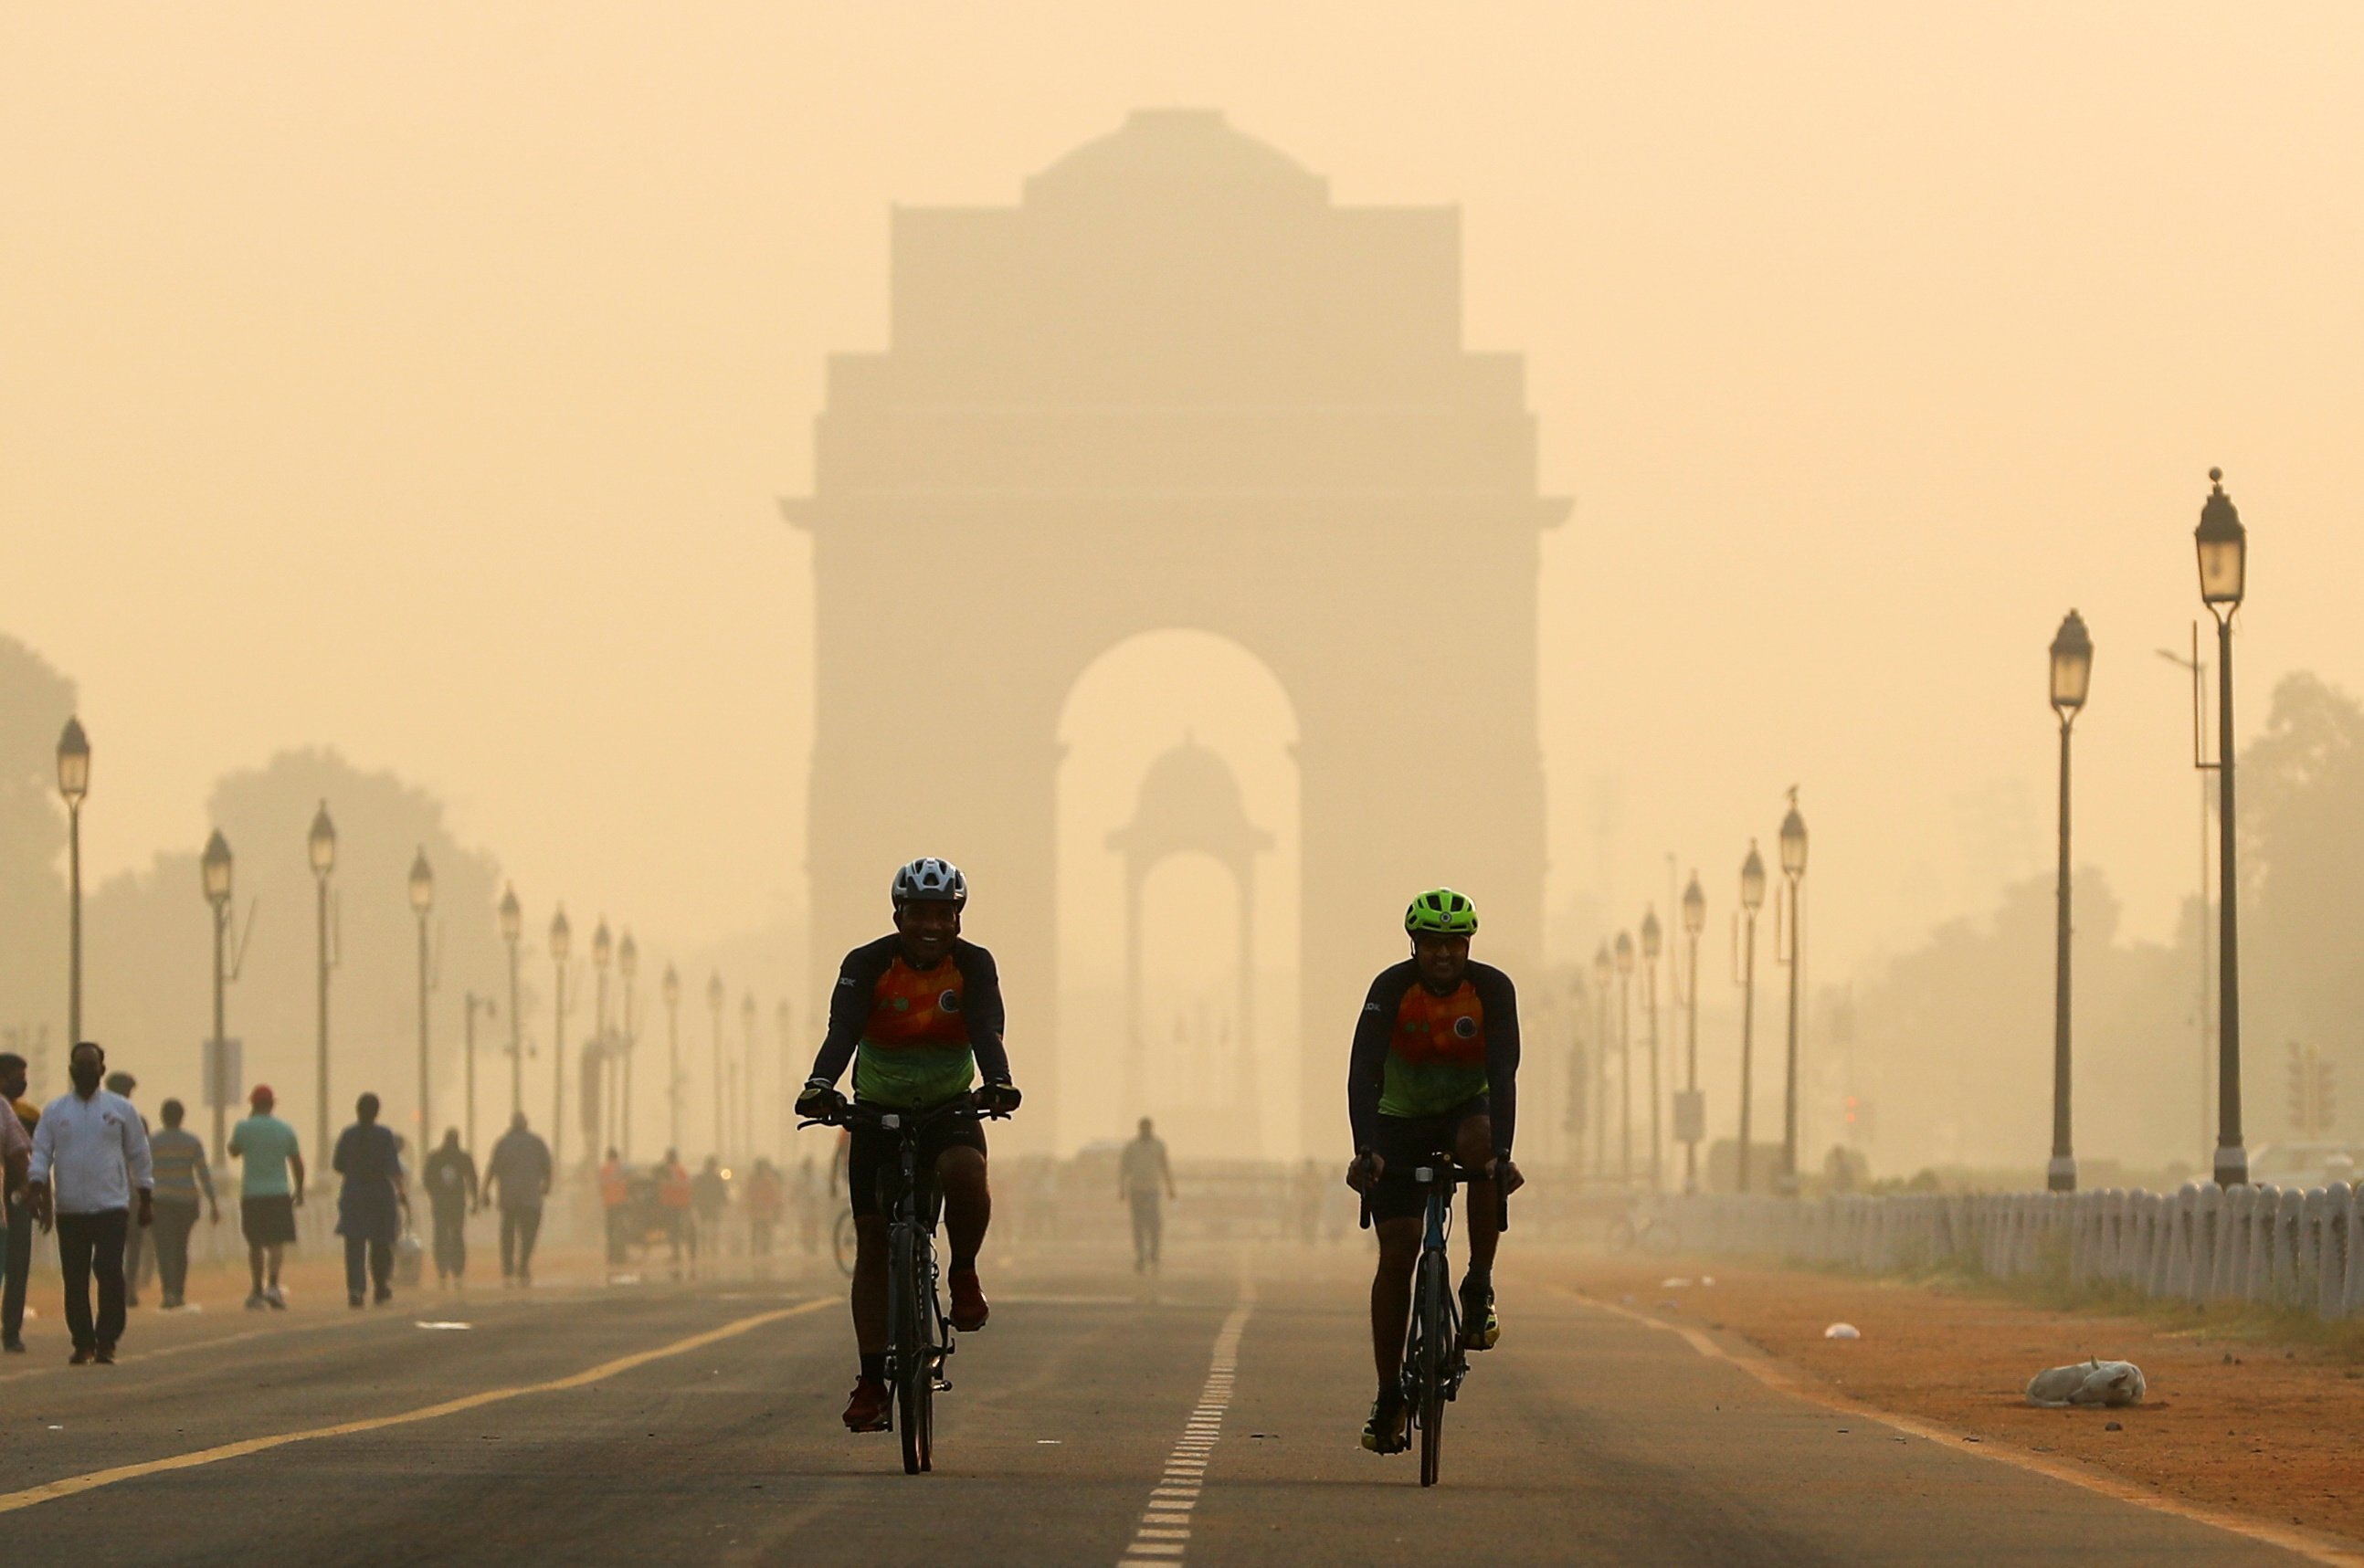 Men ride their bicycles in front of the India Gate shrouded in smog, in New Delhi, India, on October 24, 2020. A UN report projects New Delhi will overtake Tokyo as the world’s most populated mega-city in 2030. Photo: Reuters